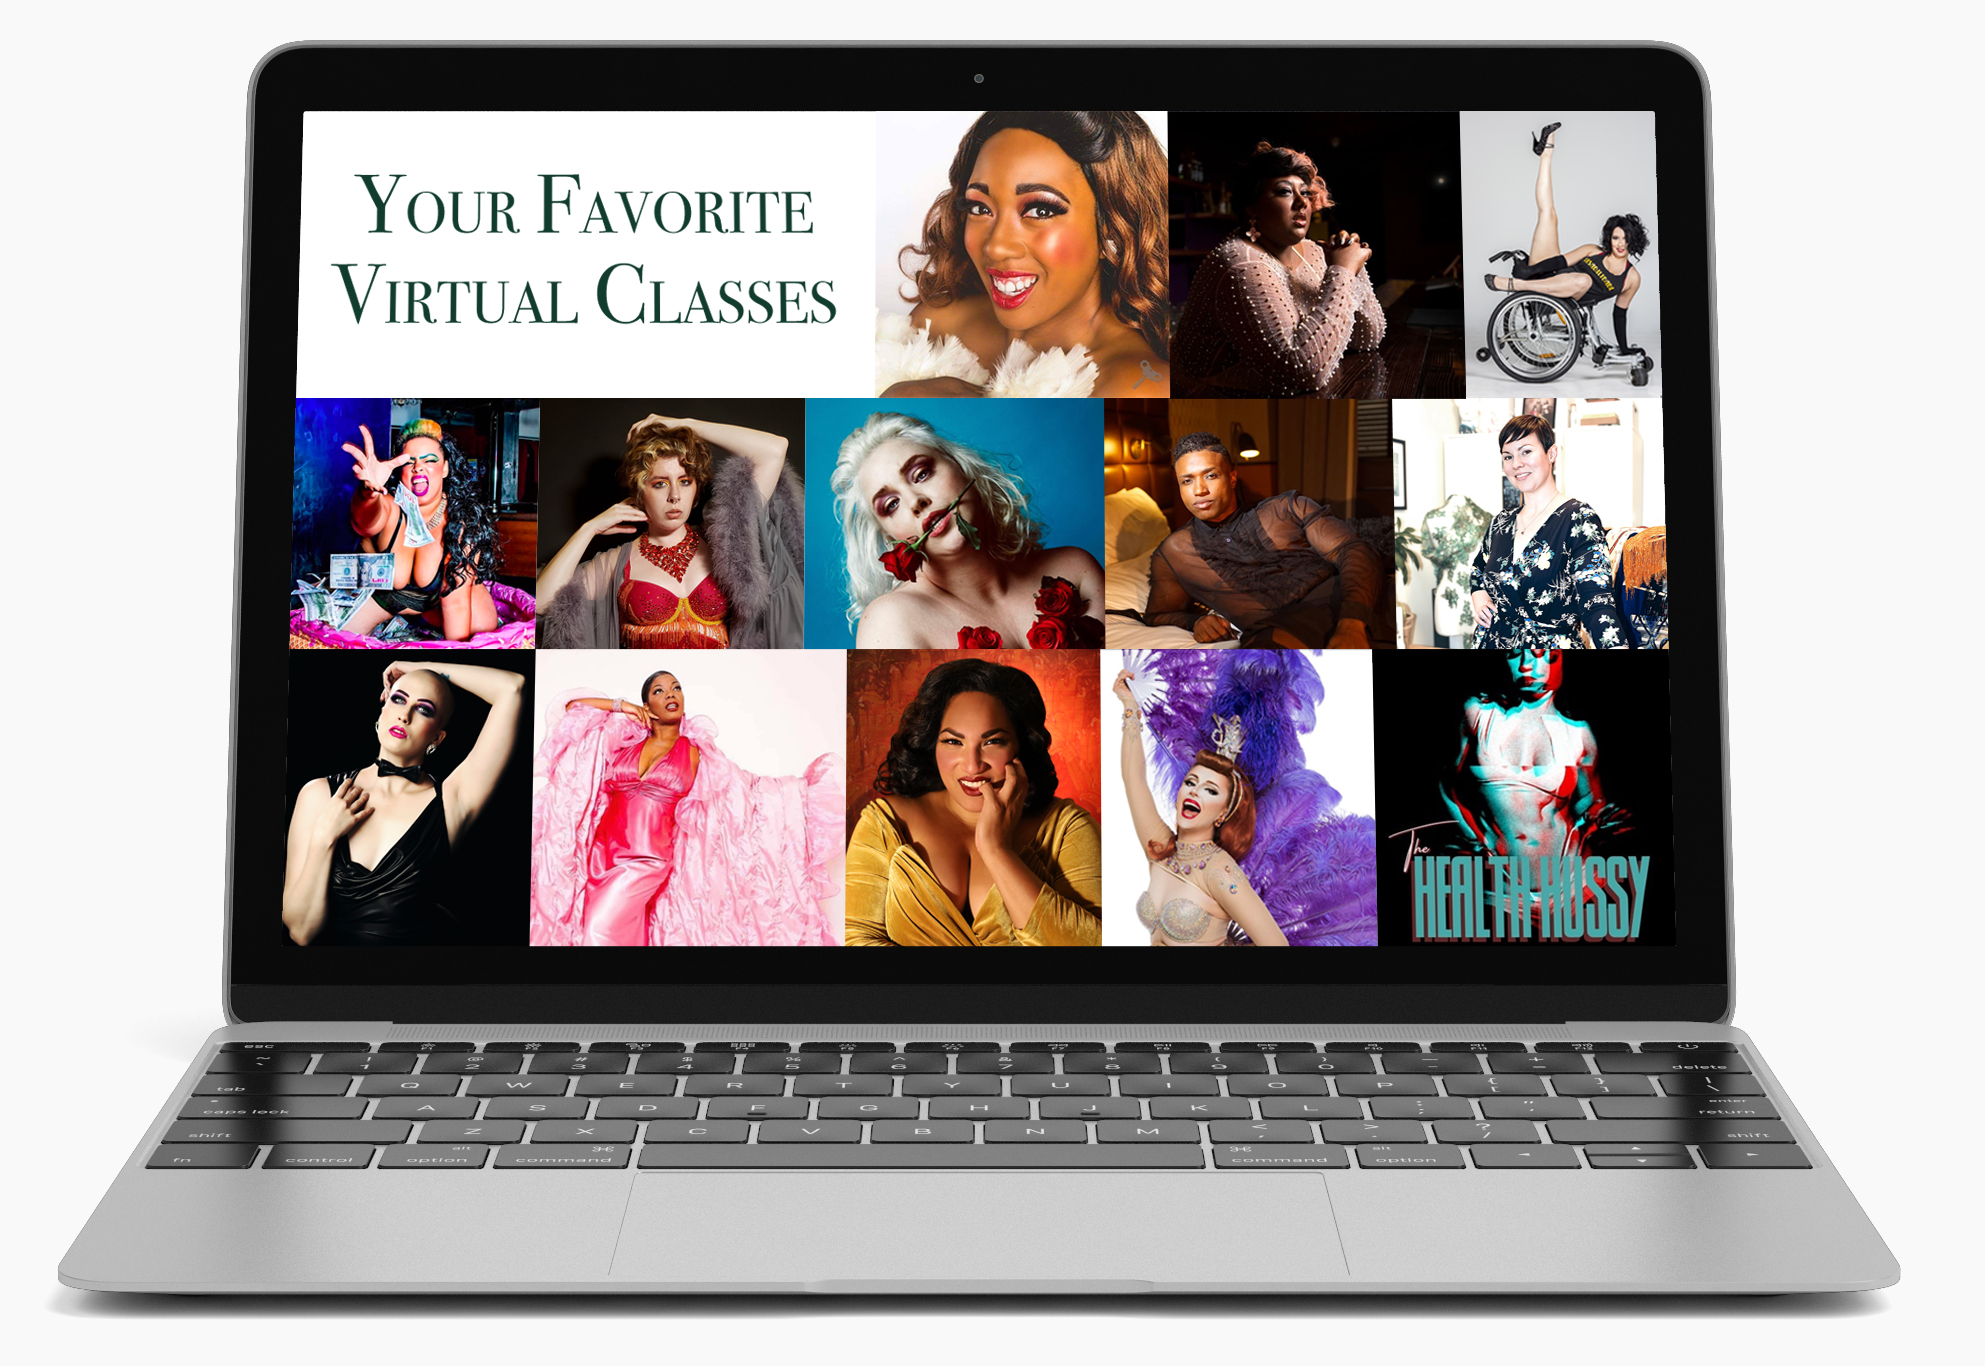 Image of a laptop with the words "Your favorite virtual classes" at the top left of a grid of photos of instructors